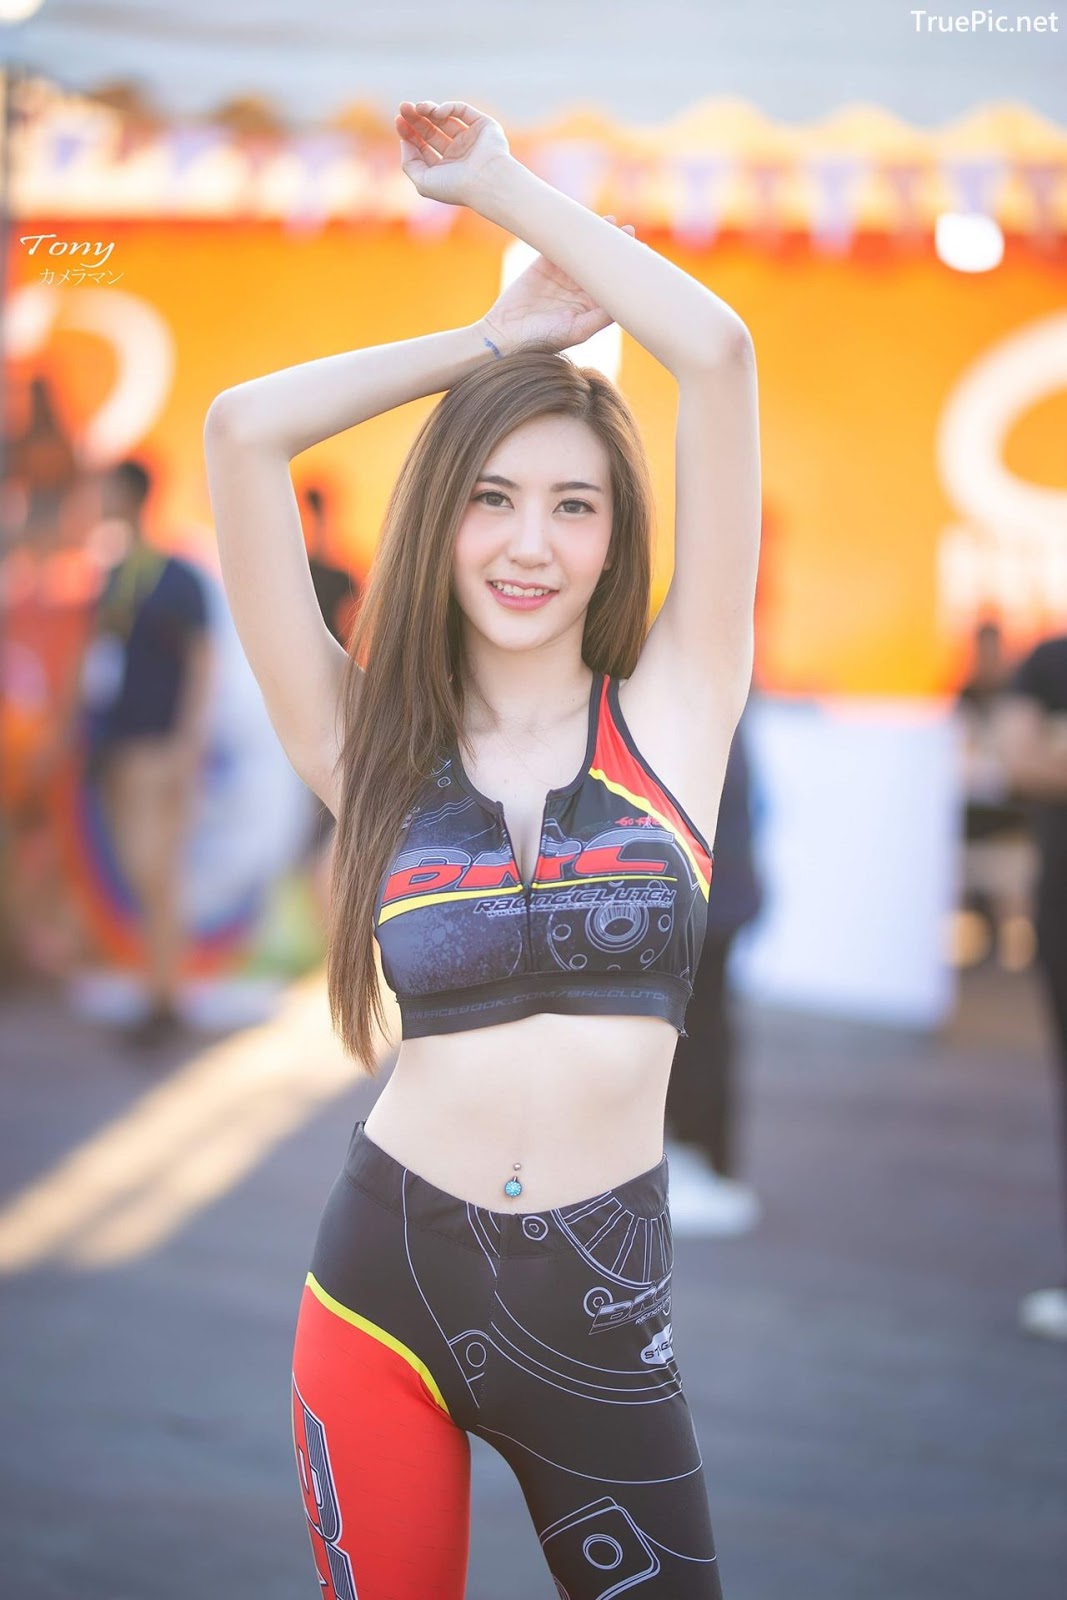 Image-Thailand-Hot-Model-Thai-Racing-Girl-At-Pathum-Thani-Speedway-TruePic.net- Picture-52